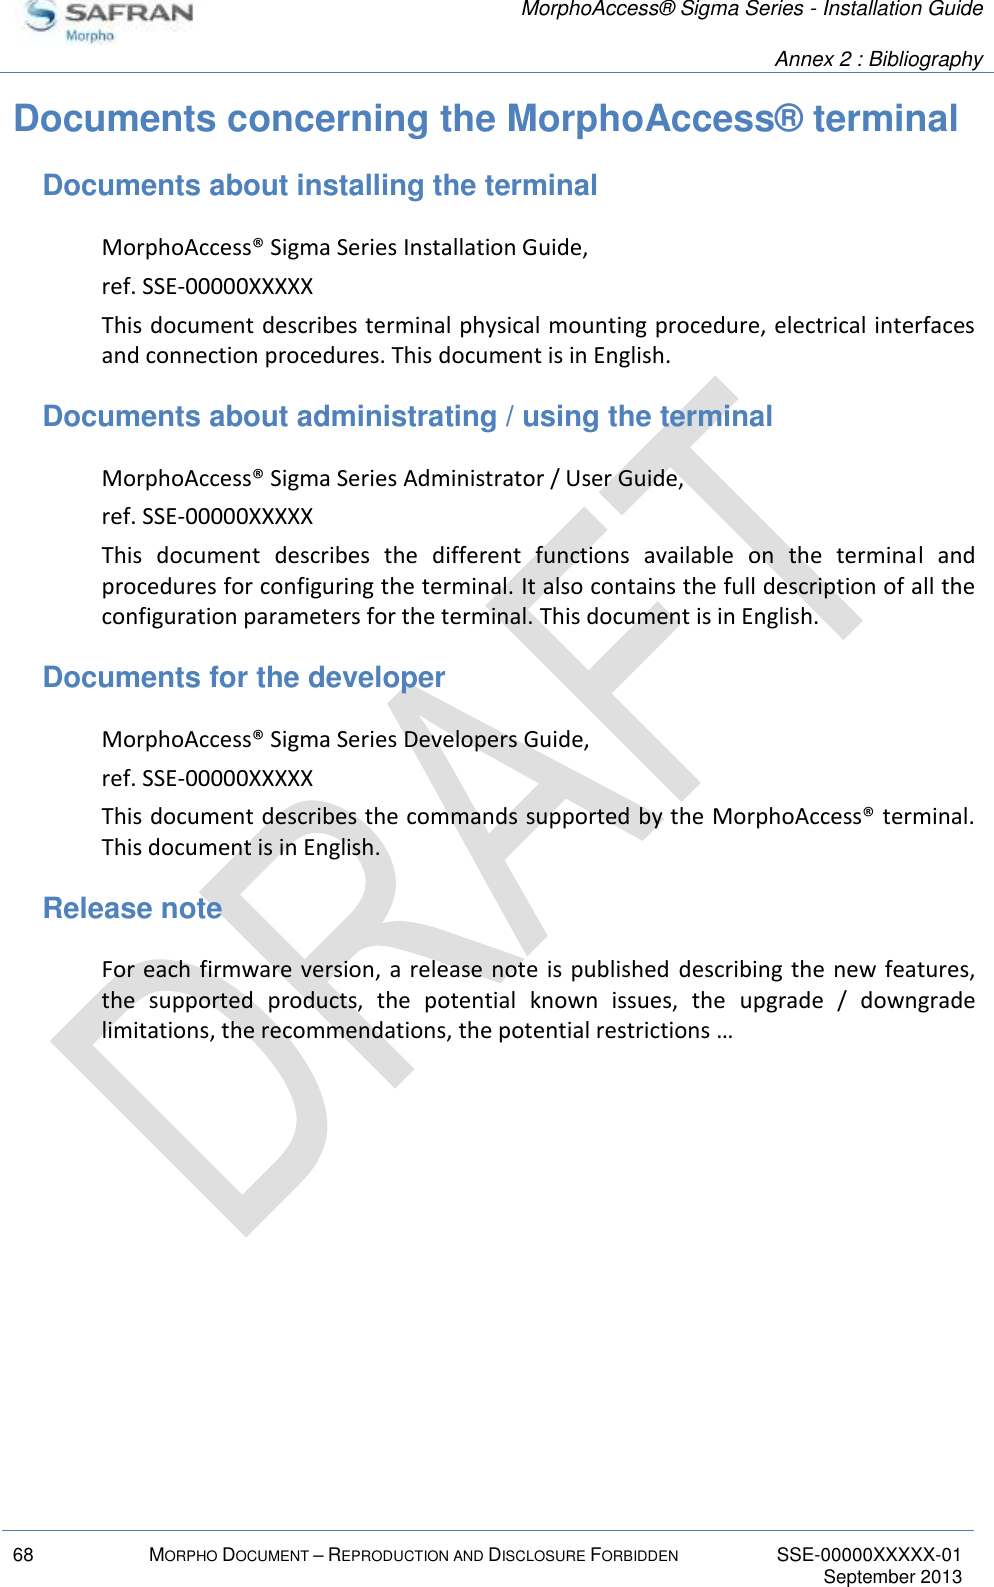   MorphoAccess® Sigma Series - Installation Guide   Annex 2 : Bibliography  68 MORPHO DOCUMENT – REPRODUCTION AND DISCLOSURE FORBIDDEN SSE-00000XXXXX-01   September 2013  Documents concerning the MorphoAccess® terminal Documents about installing the terminal MorphoAccess® Sigma Series Installation Guide, ref. SSE-00000XXXXX This document describes terminal physical mounting procedure, electrical interfaces and connection procedures. This document is in English. Documents about administrating / using the terminal MorphoAccess® Sigma Series Administrator / User Guide, ref. SSE-00000XXXXX This  document  describes  the  different  functions  available  on  the  terminal  and procedures for configuring the terminal. It also contains the full description of all the configuration parameters for the terminal. This document is in English. Documents for the developer MorphoAccess® Sigma Series Developers Guide, ref. SSE-00000XXXXX This document describes the commands supported by the MorphoAccess® terminal. This document is in English. Release note For each firmware version, a release note is published  describing the new features, the  supported  products,  the  potential  known  issues,  the  upgrade  /  downgrade limitations, the recommendations, the potential restrictions … 